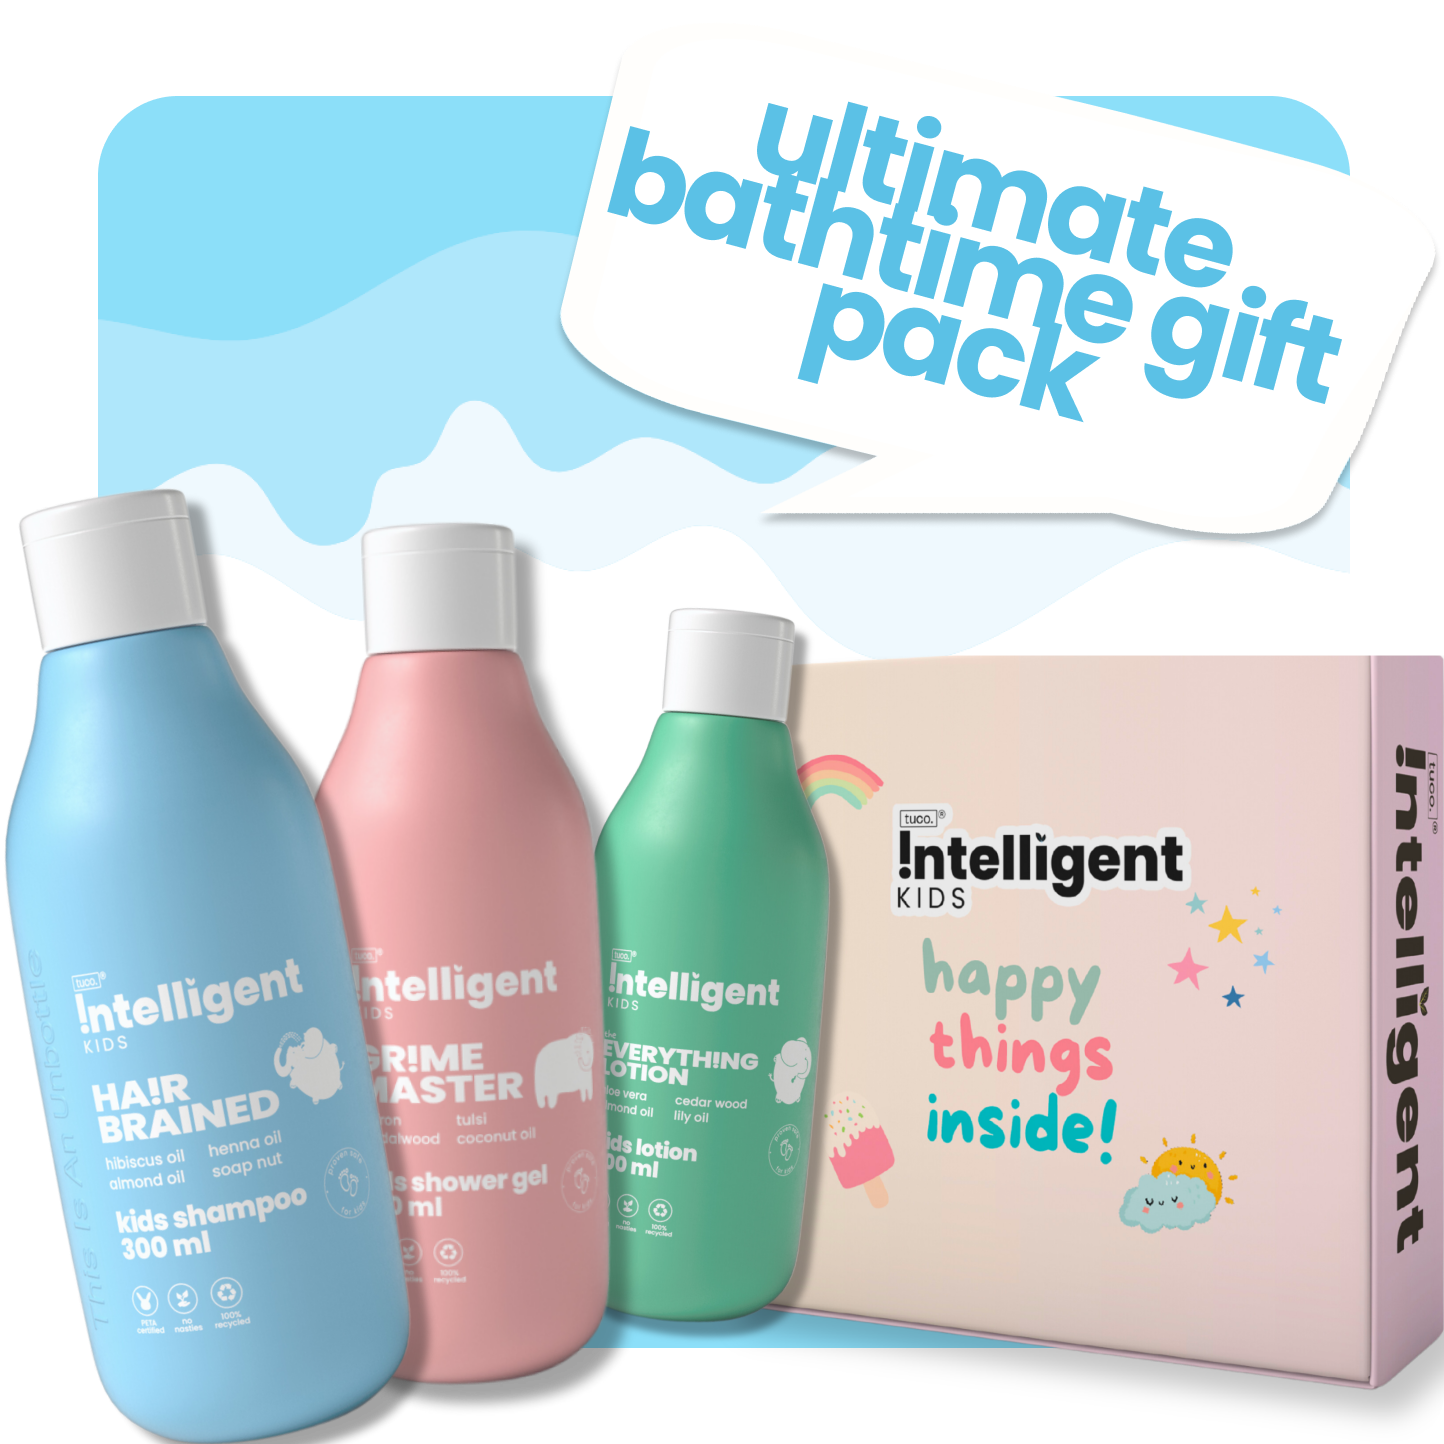 Ultimate Bathtime Gift Pack for Kids - All-in-One Natural Skincare Bundle Featuring Everything Lotion, Grime Master Kids Shower Gel, and Hair Brained Kids Shampoo - Perfect for Gentle Cleansing, Moisturizing, and Nourishing Children's Skin and Hair - Ideal Gift for a Complete Bath Routine